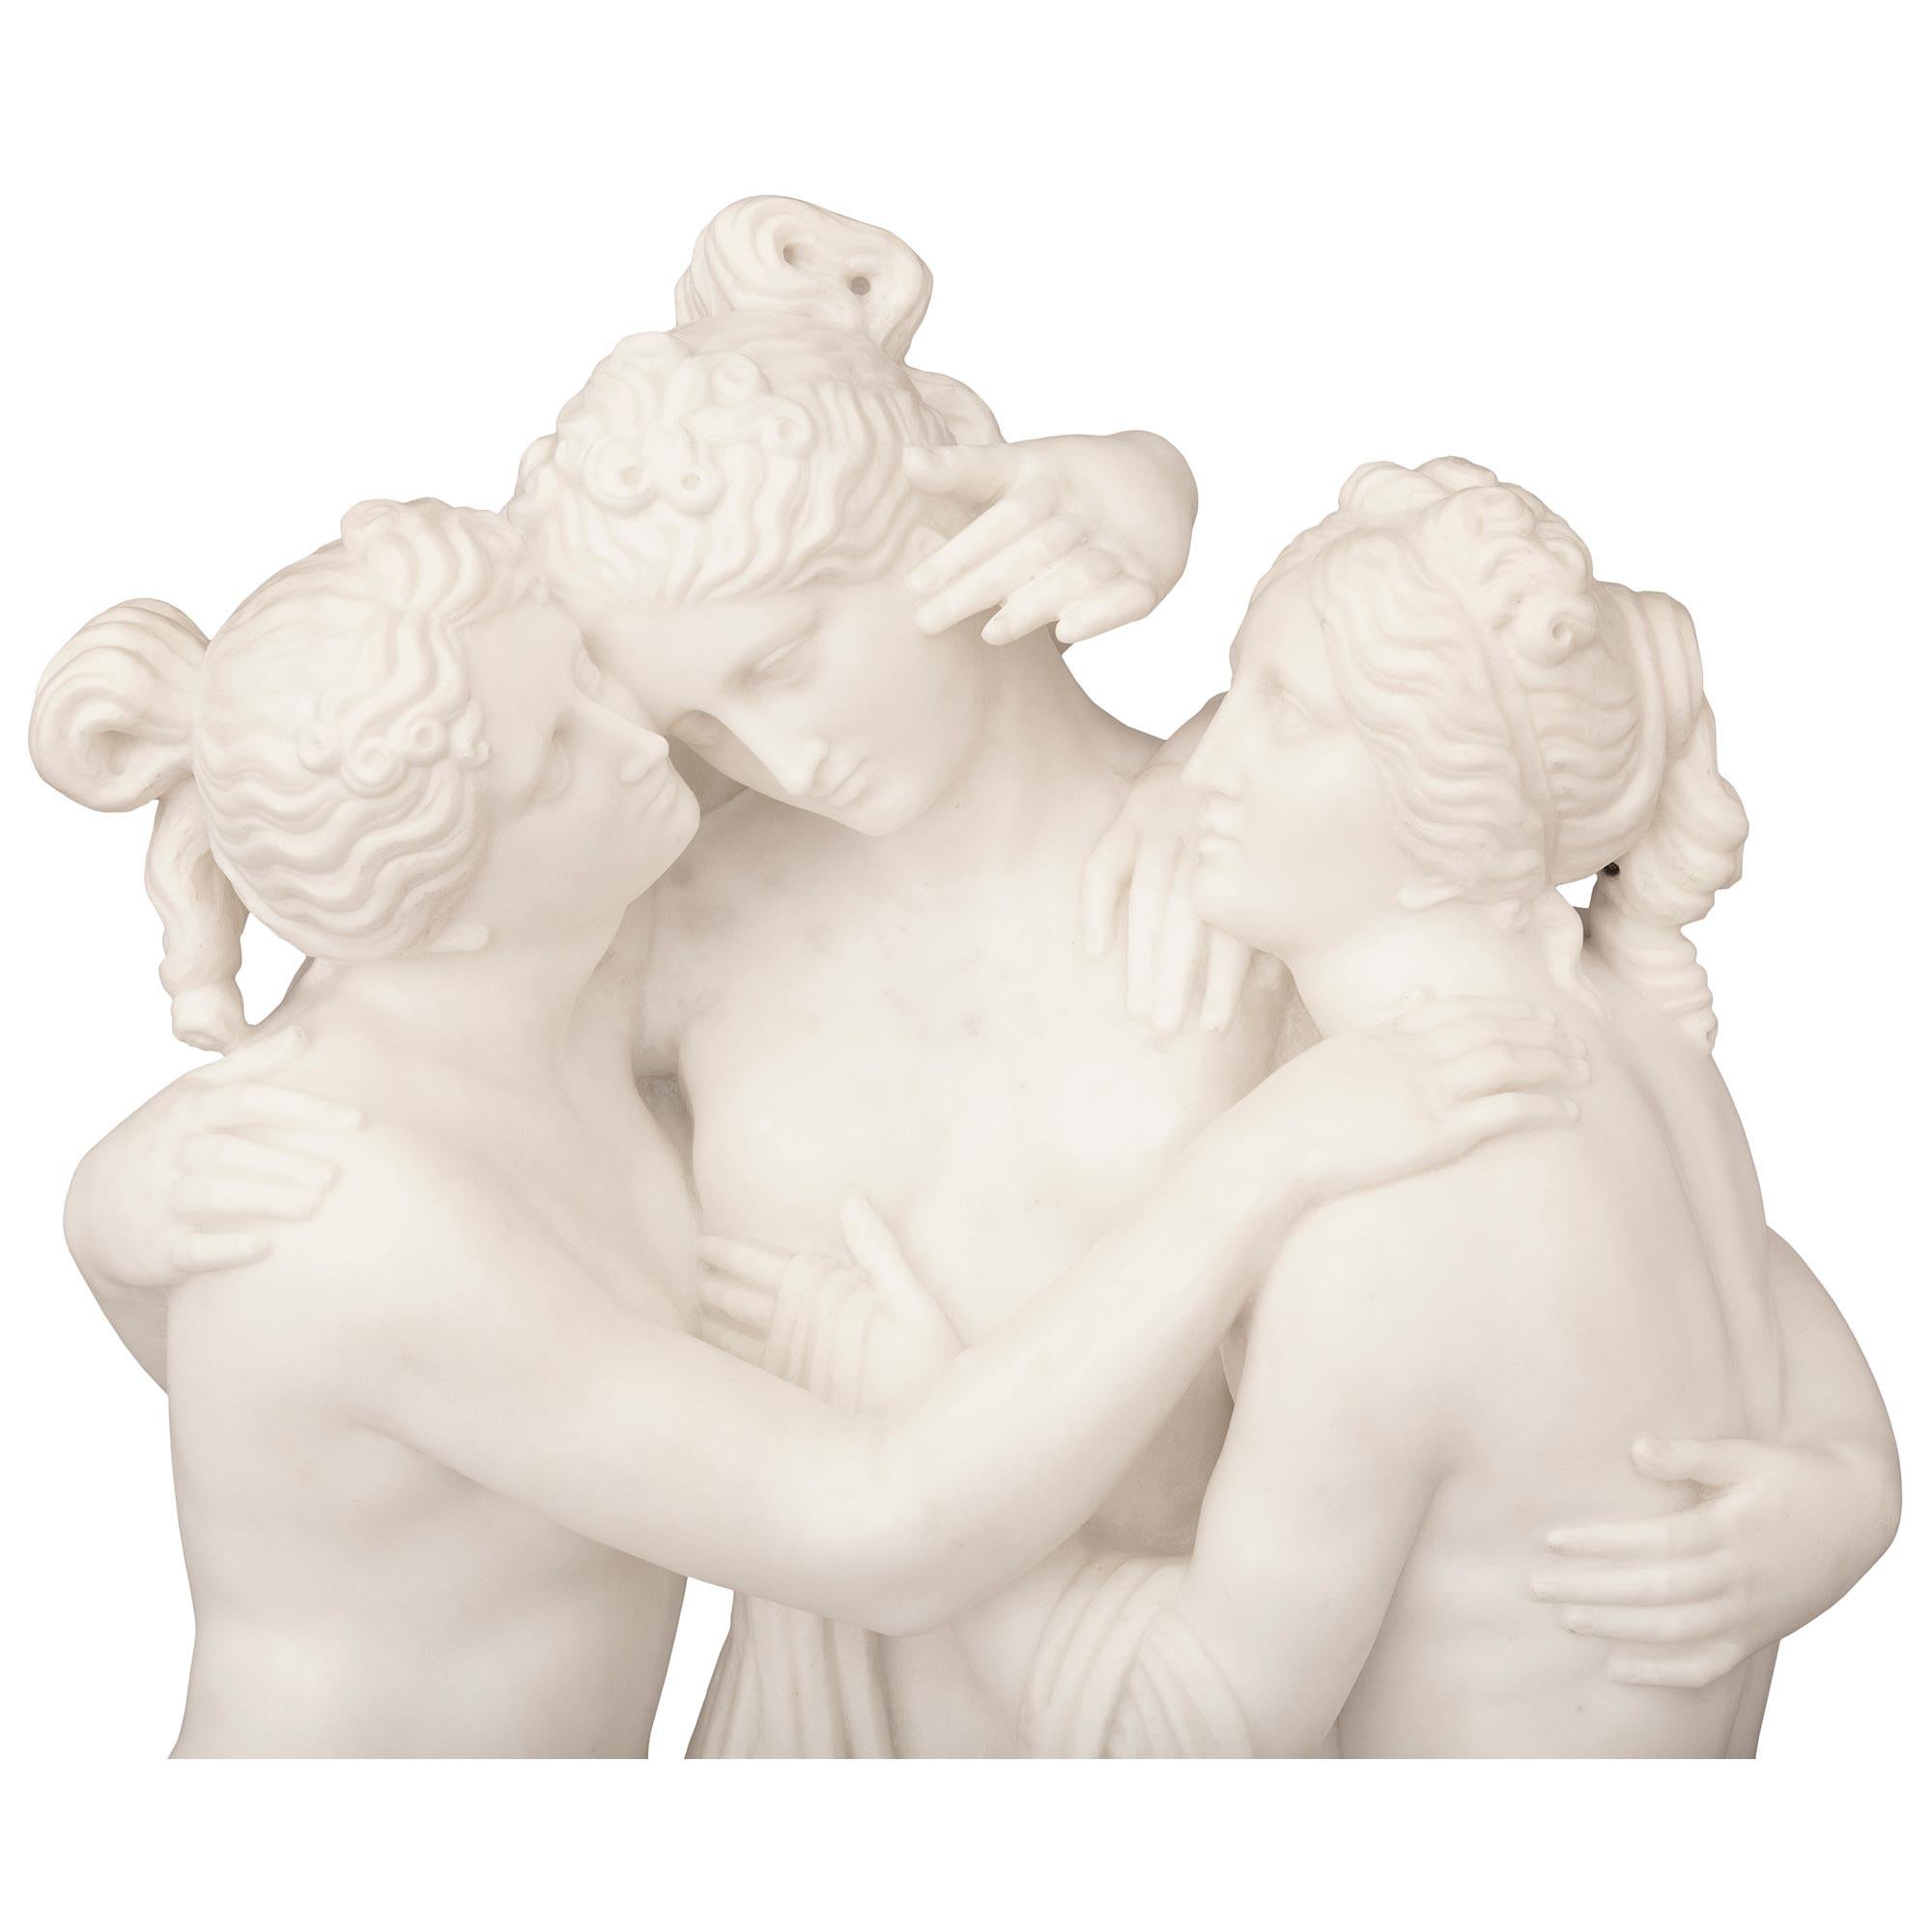 A stunning and extremely high quality Italian 19th century white carrara marble statue of the three graces after a model by Antonio Canova. The statue is raised by an oblong base with fine ground like designs with a pedestal draped in flowing